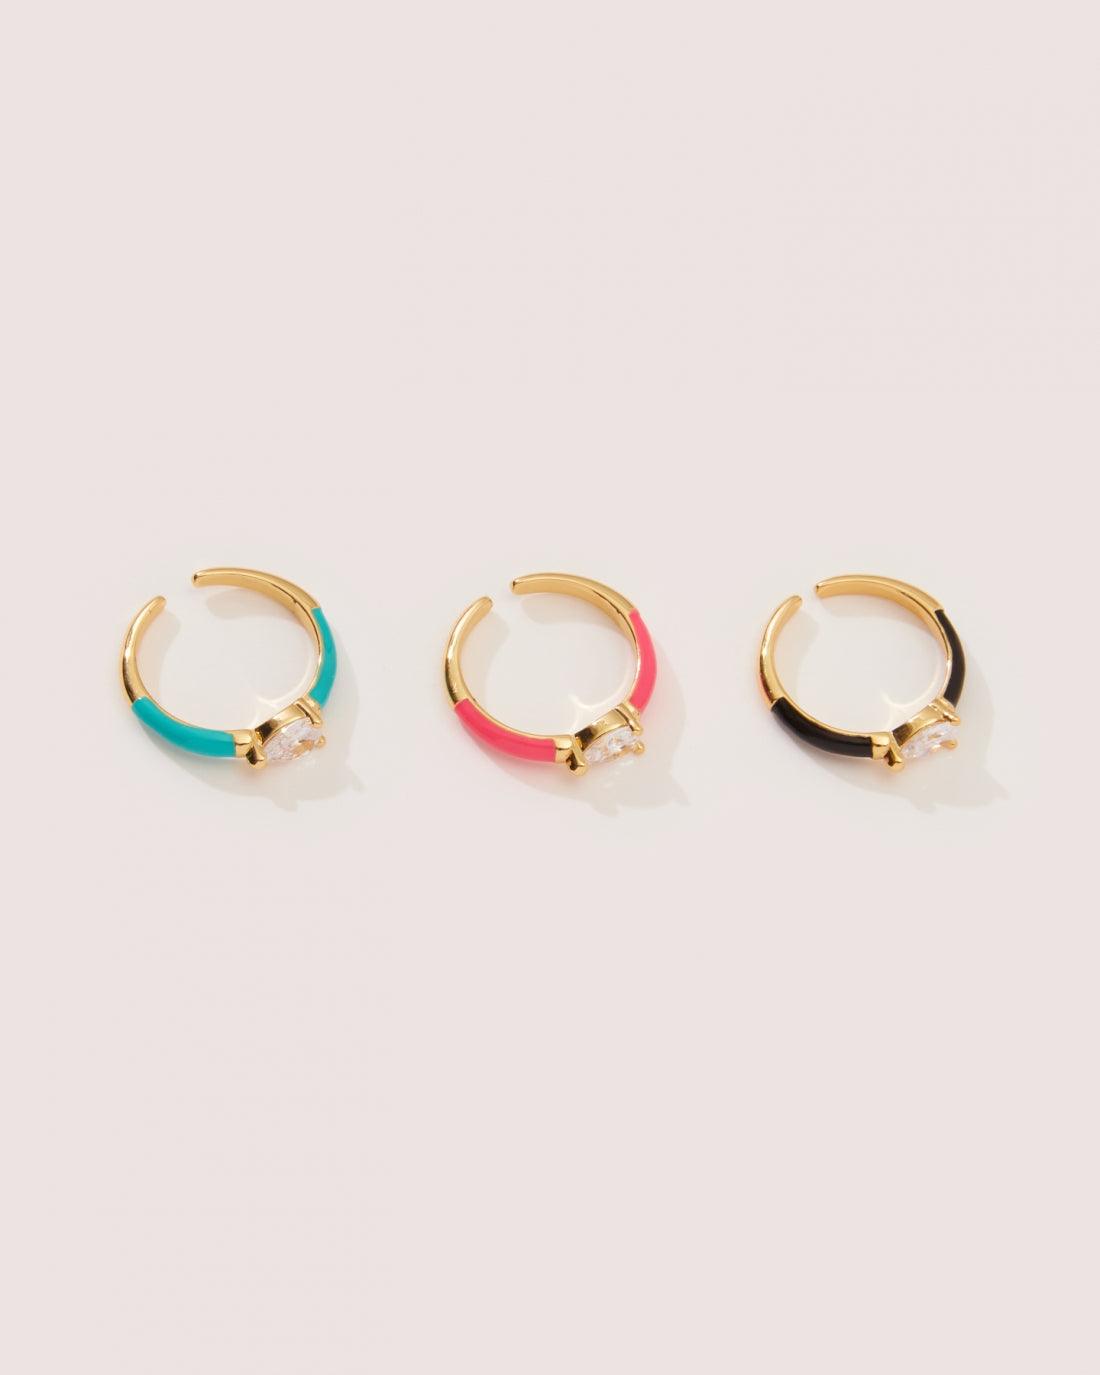 SIDE EYE RING SET - 8 Other Reasons